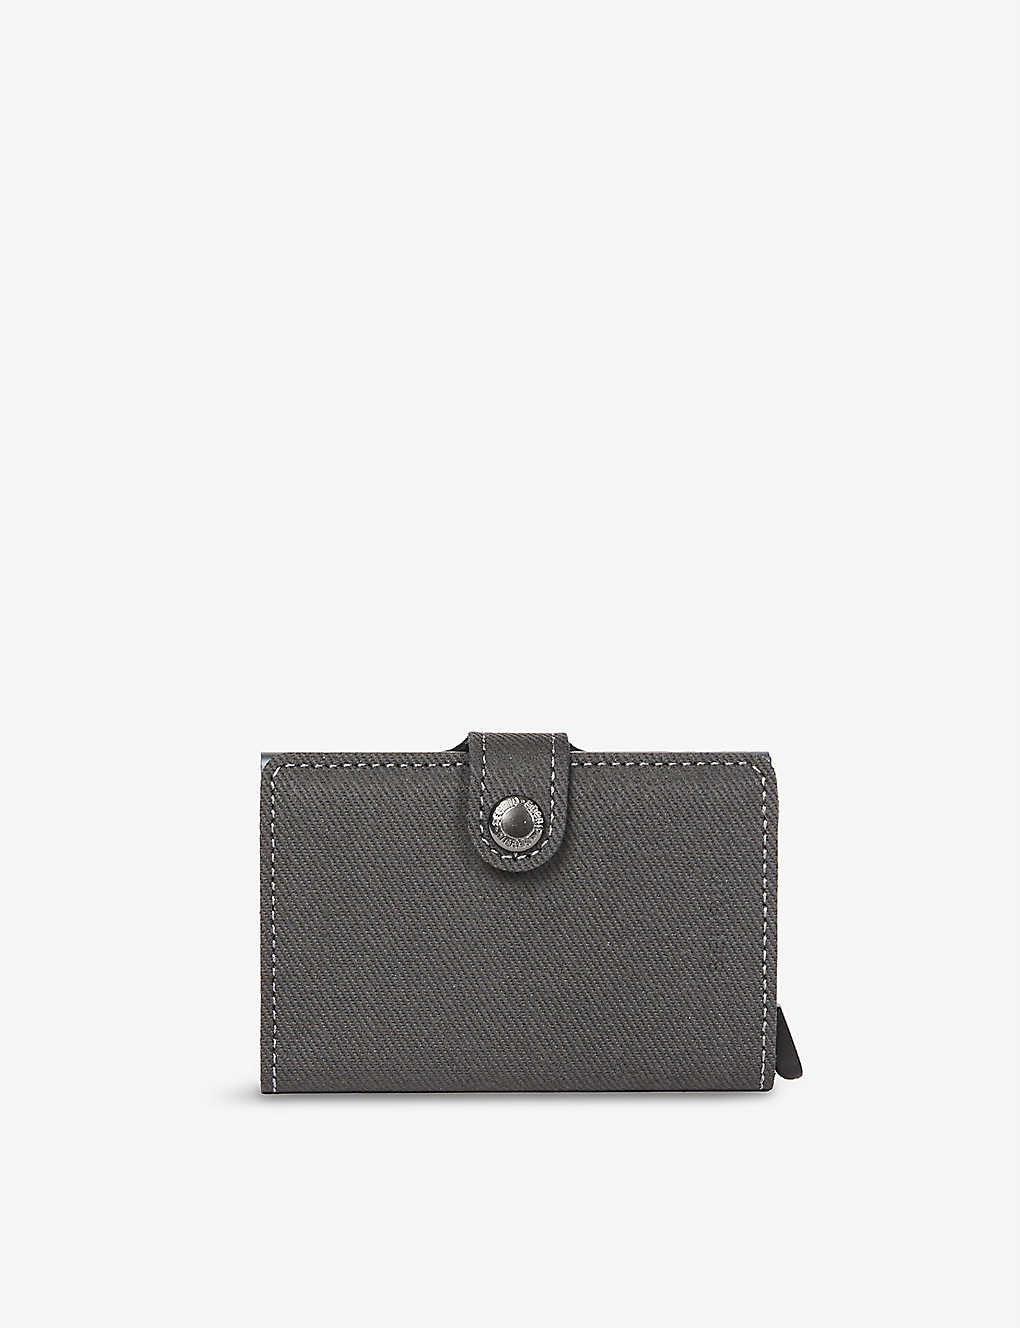 Secrid Miniwallet Leather And Aluminium Wallet In Grey